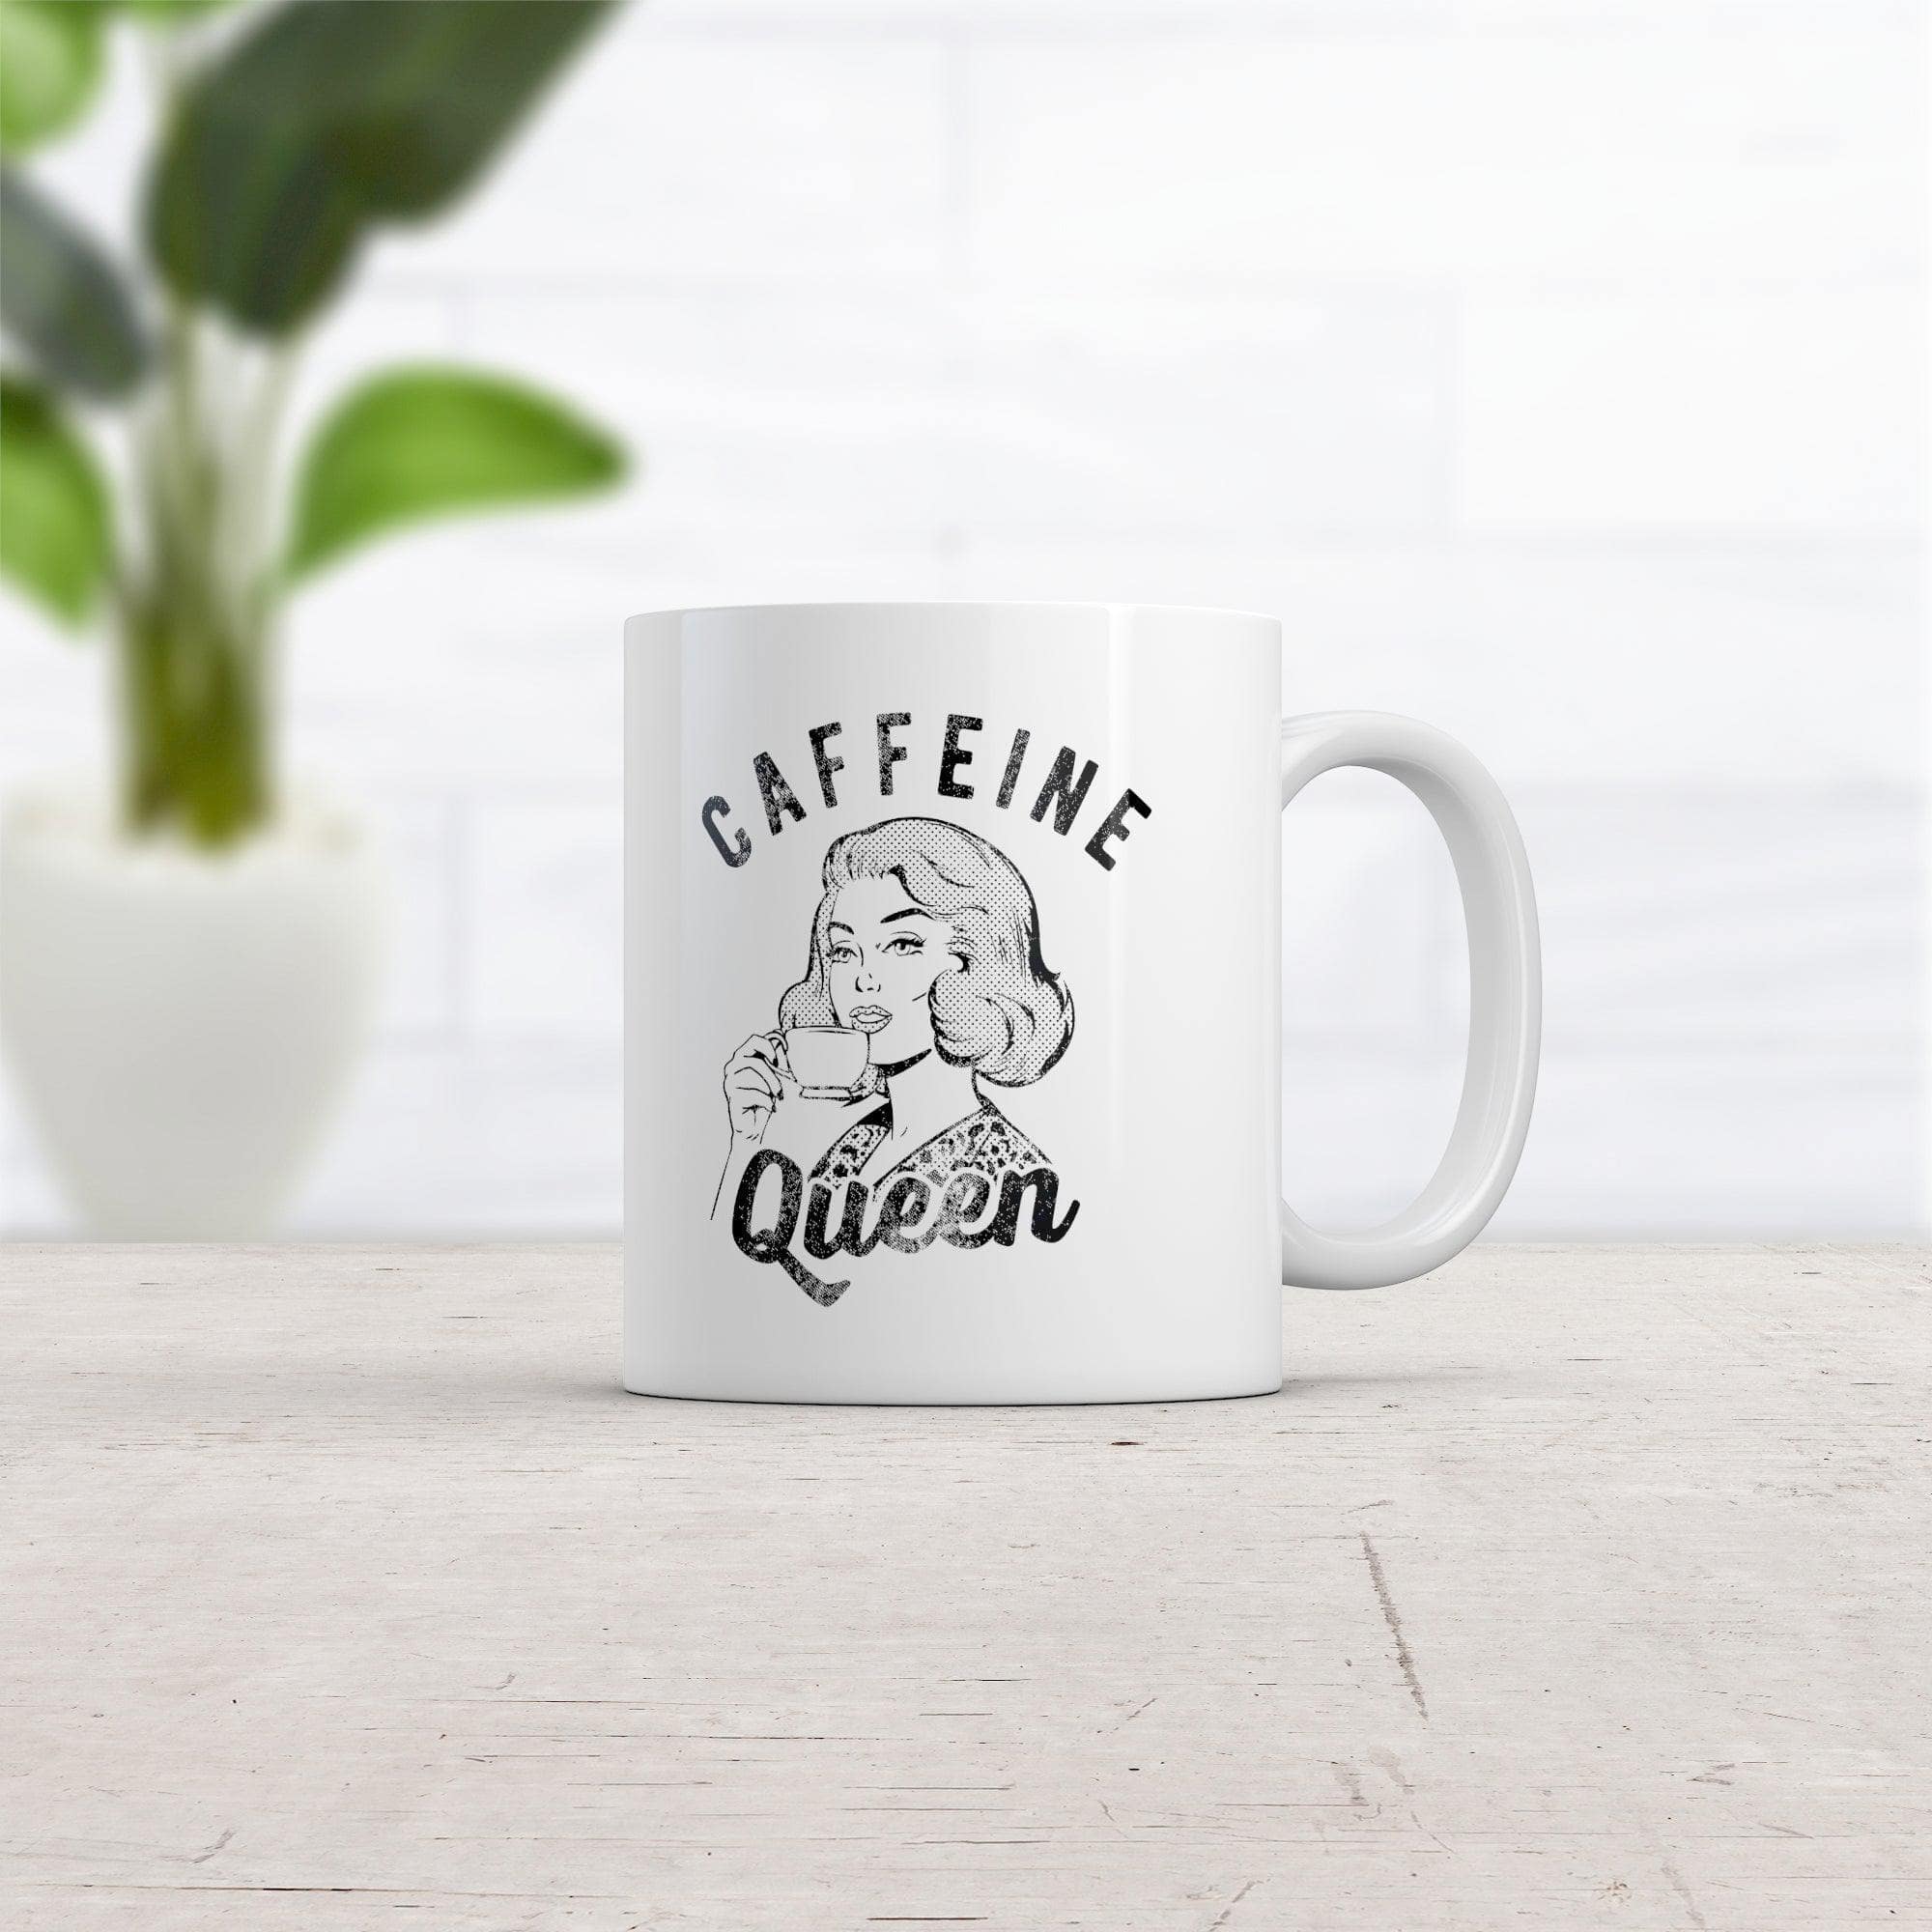 Caffeine Queen Mug Funny Sarcastic Royal Coffee Lover Graphic Novelty Cup-11oz  -  Crazy Dog T-Shirts